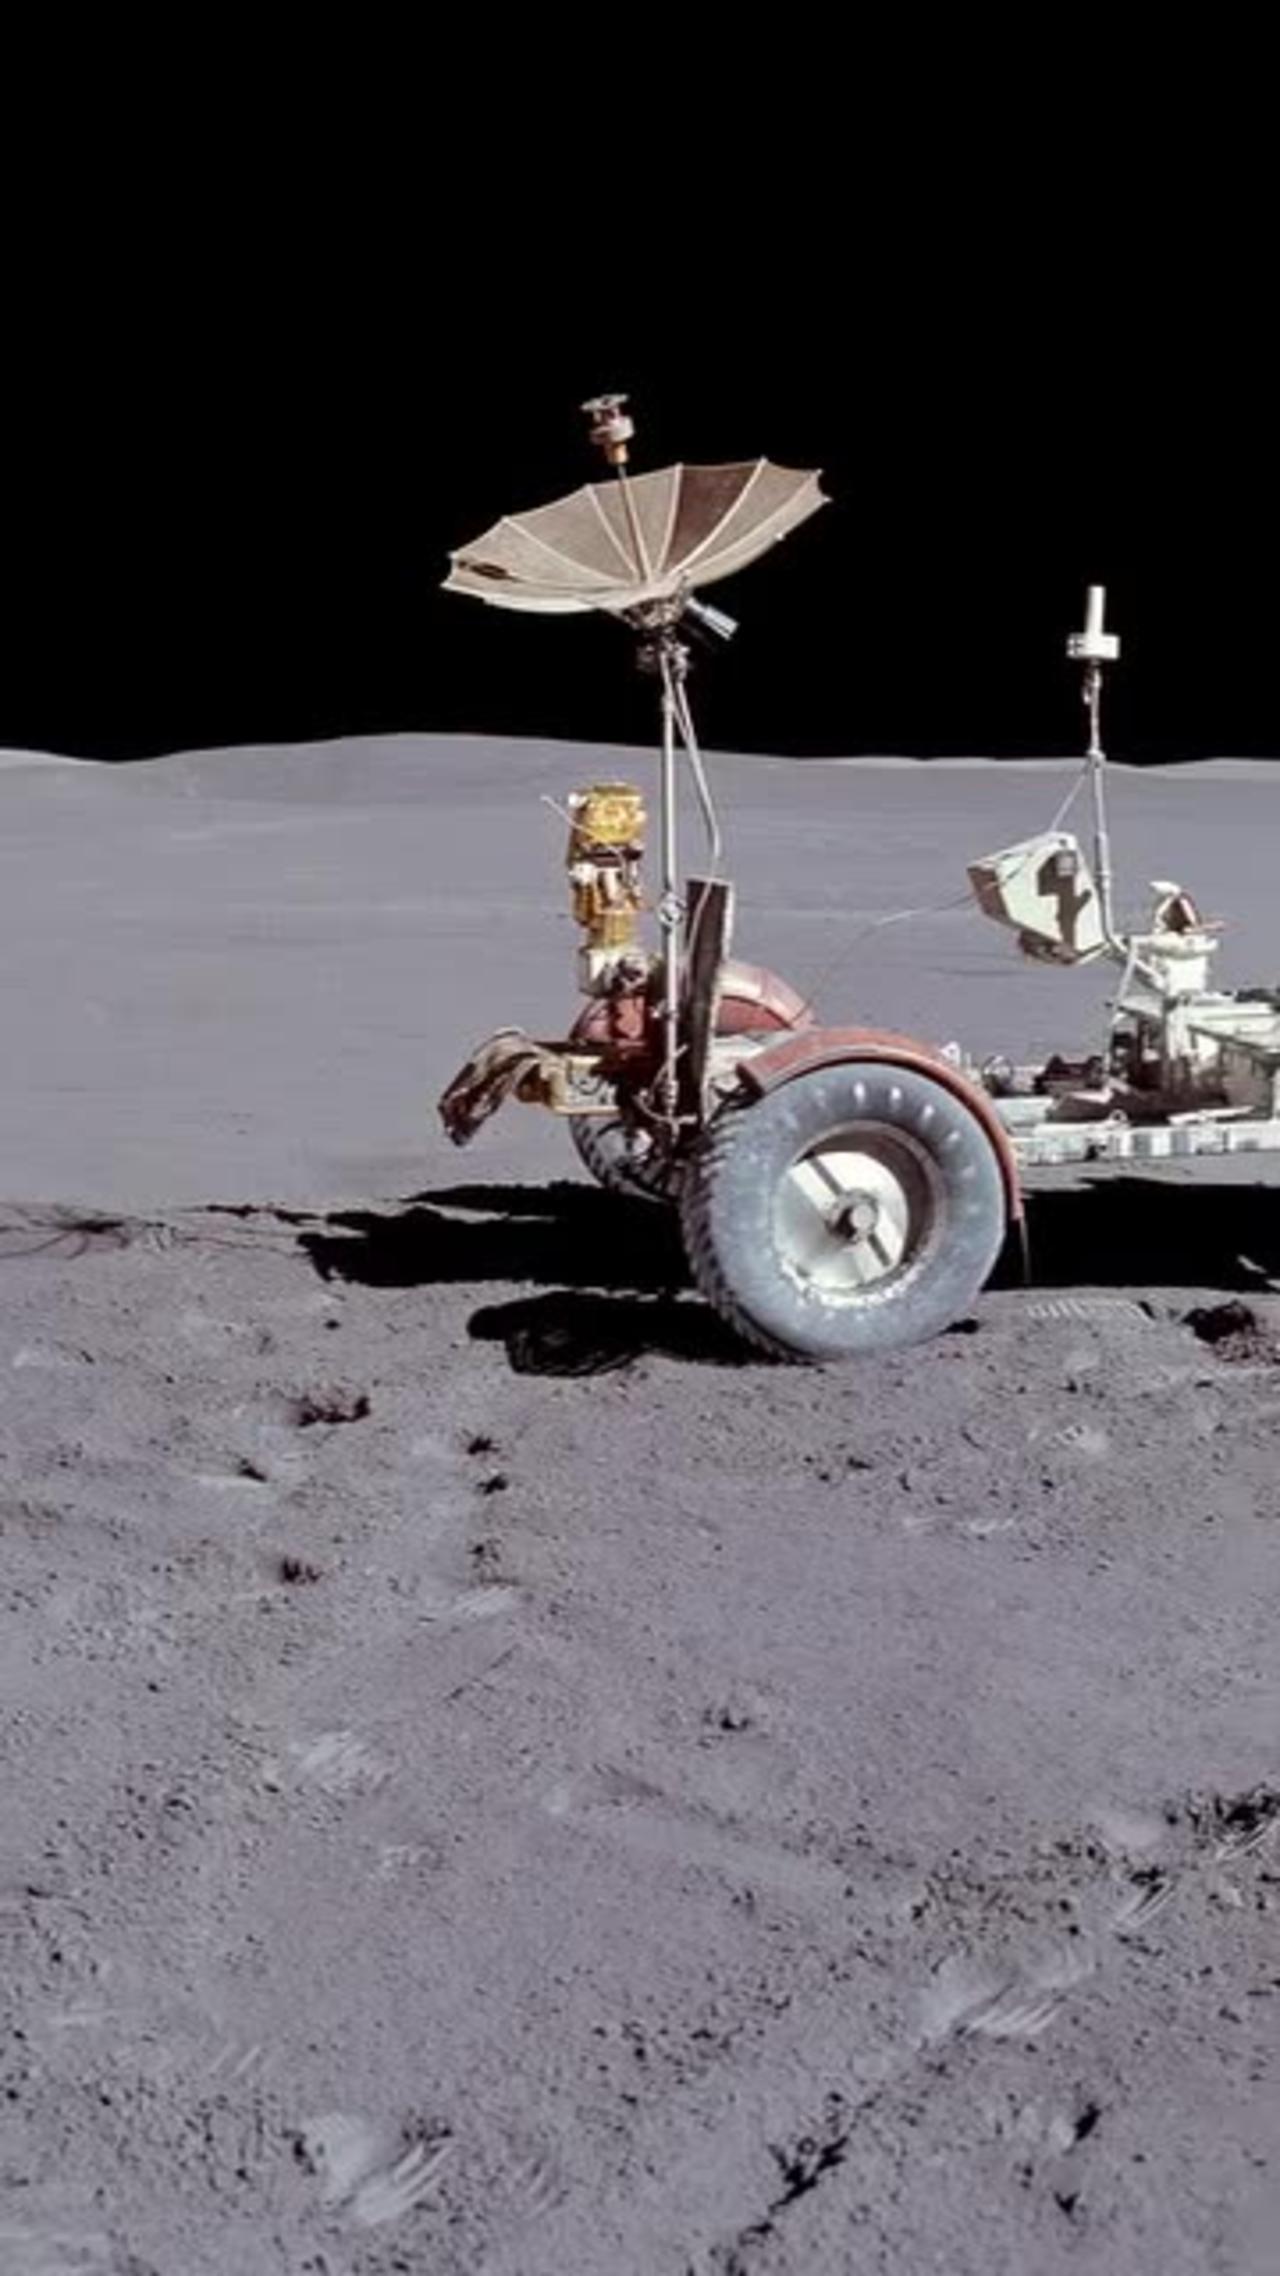 The lunar rover at its final parking place